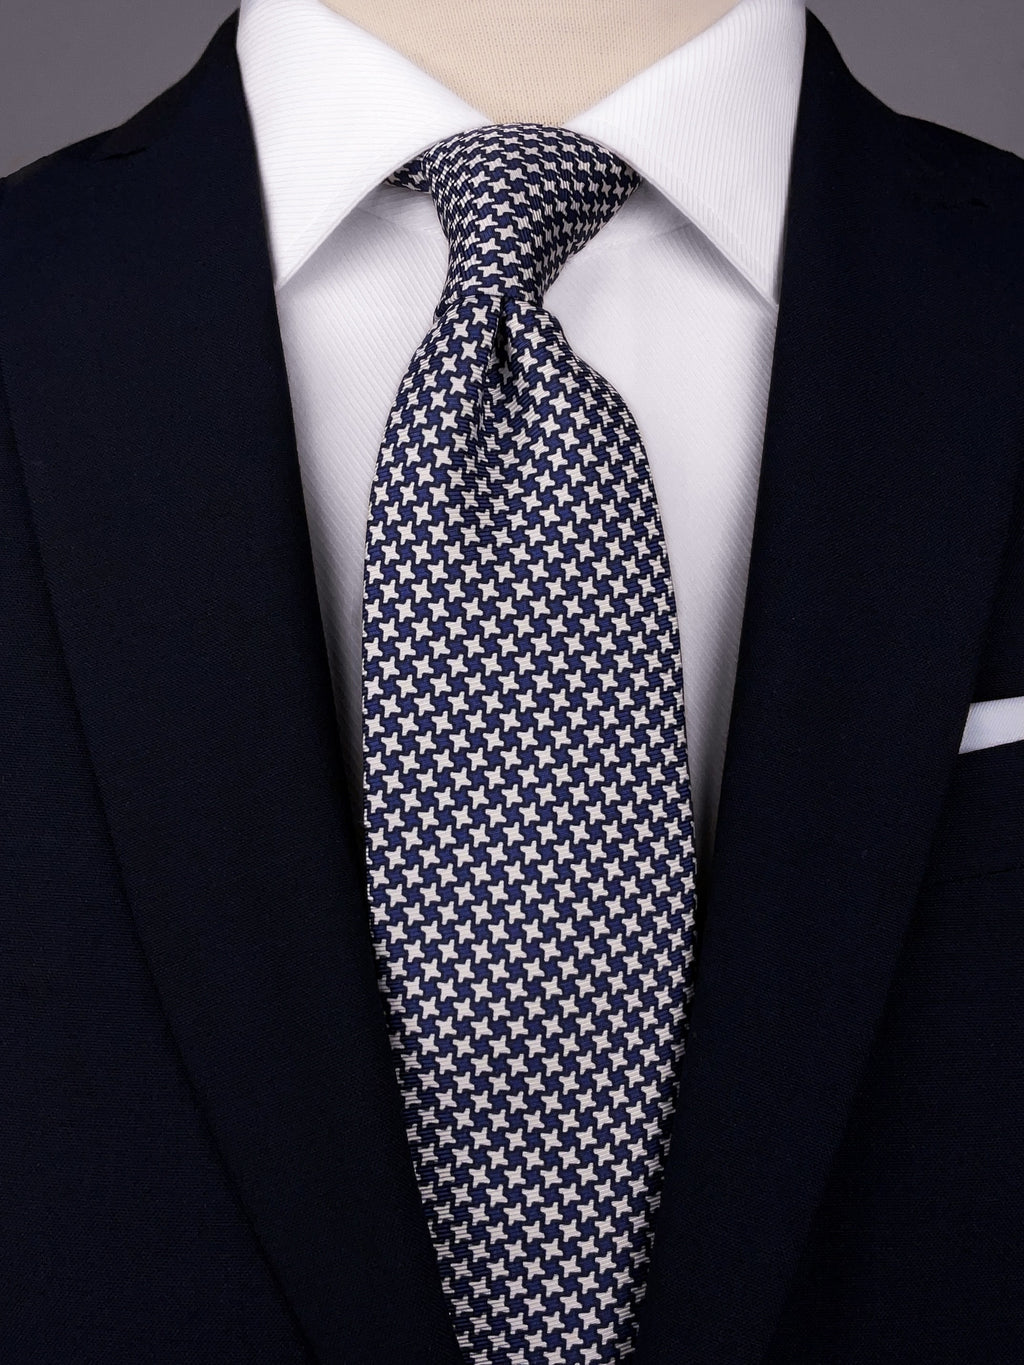 Blue and White Houndstooth silk tie worn with a white shirt and a navy blue suit